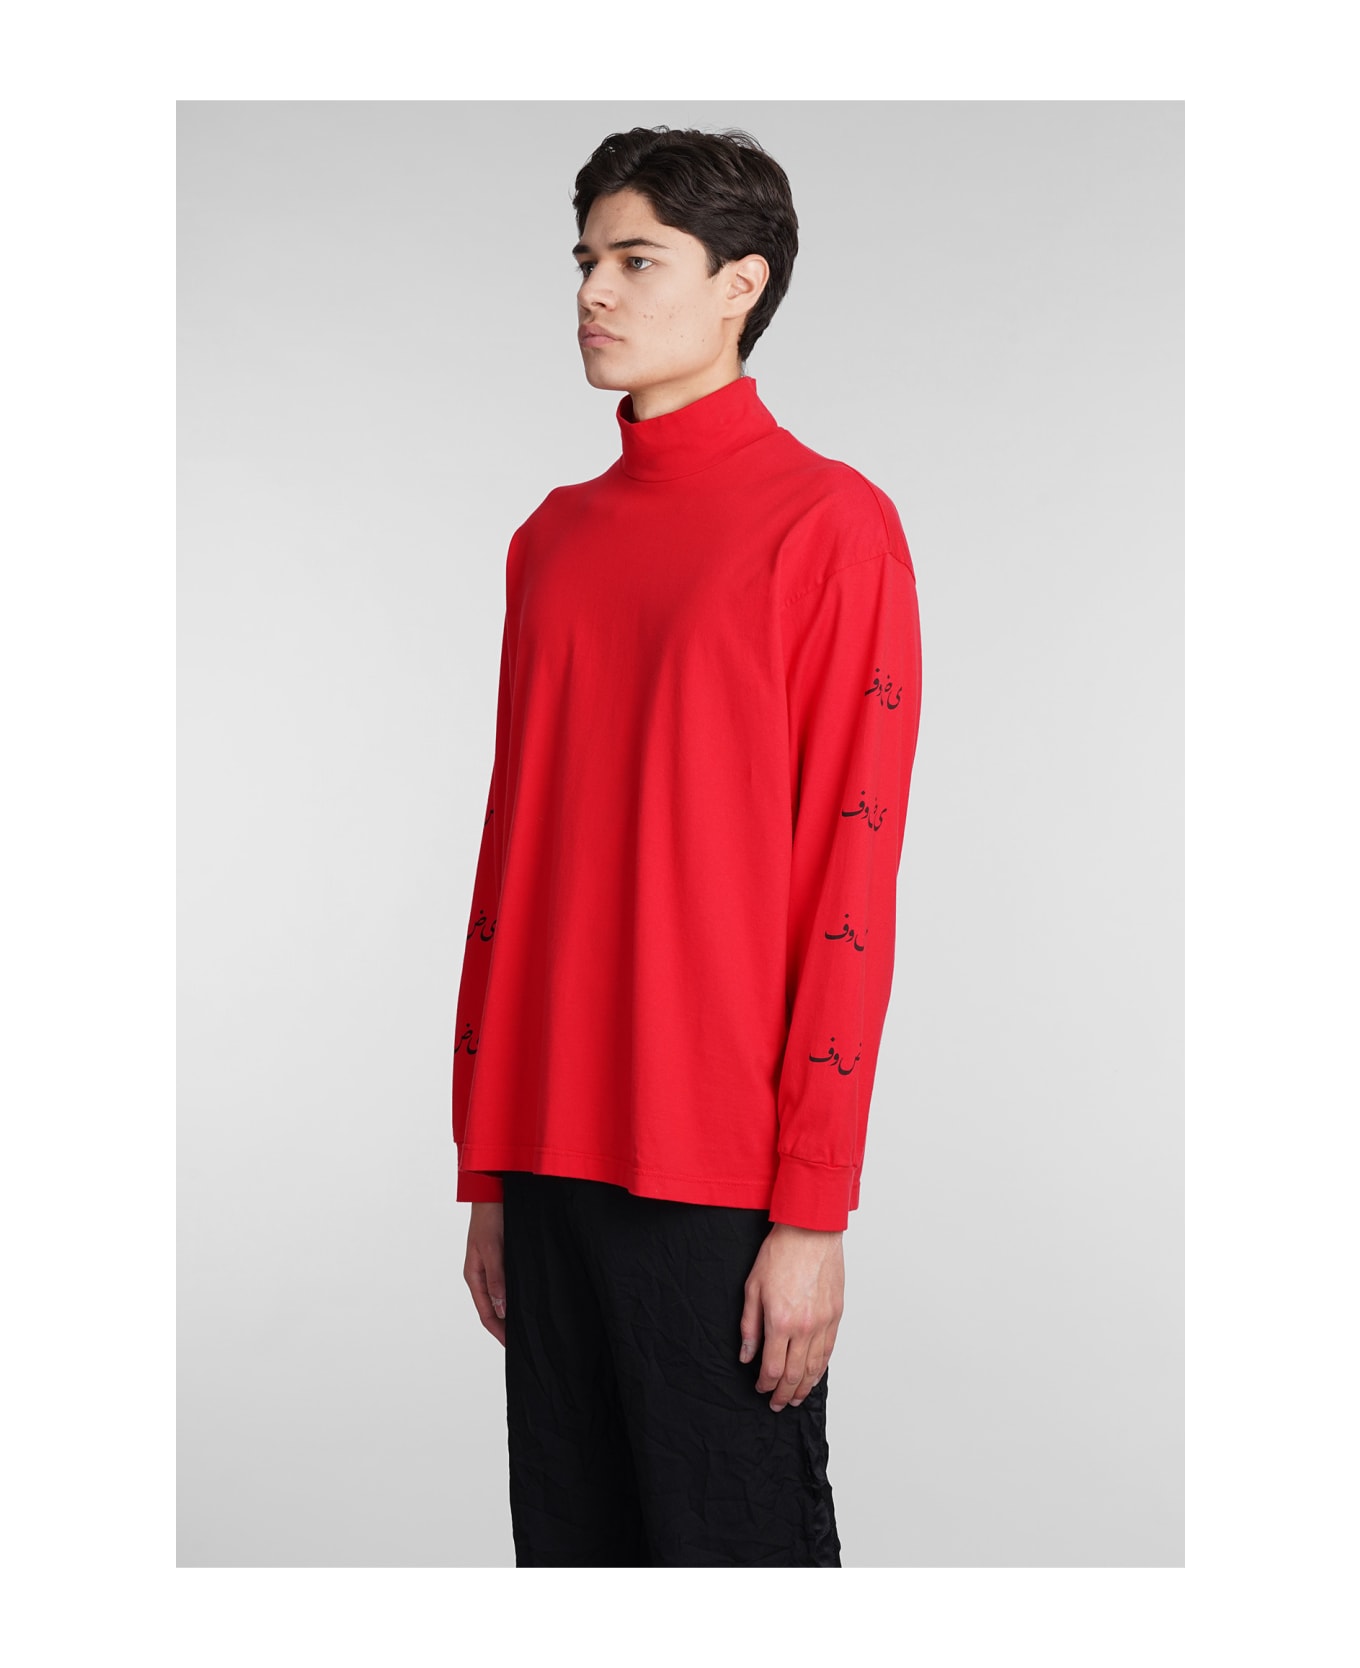 Undercover Jun Takahashi T-shirt In Red Cotton - red